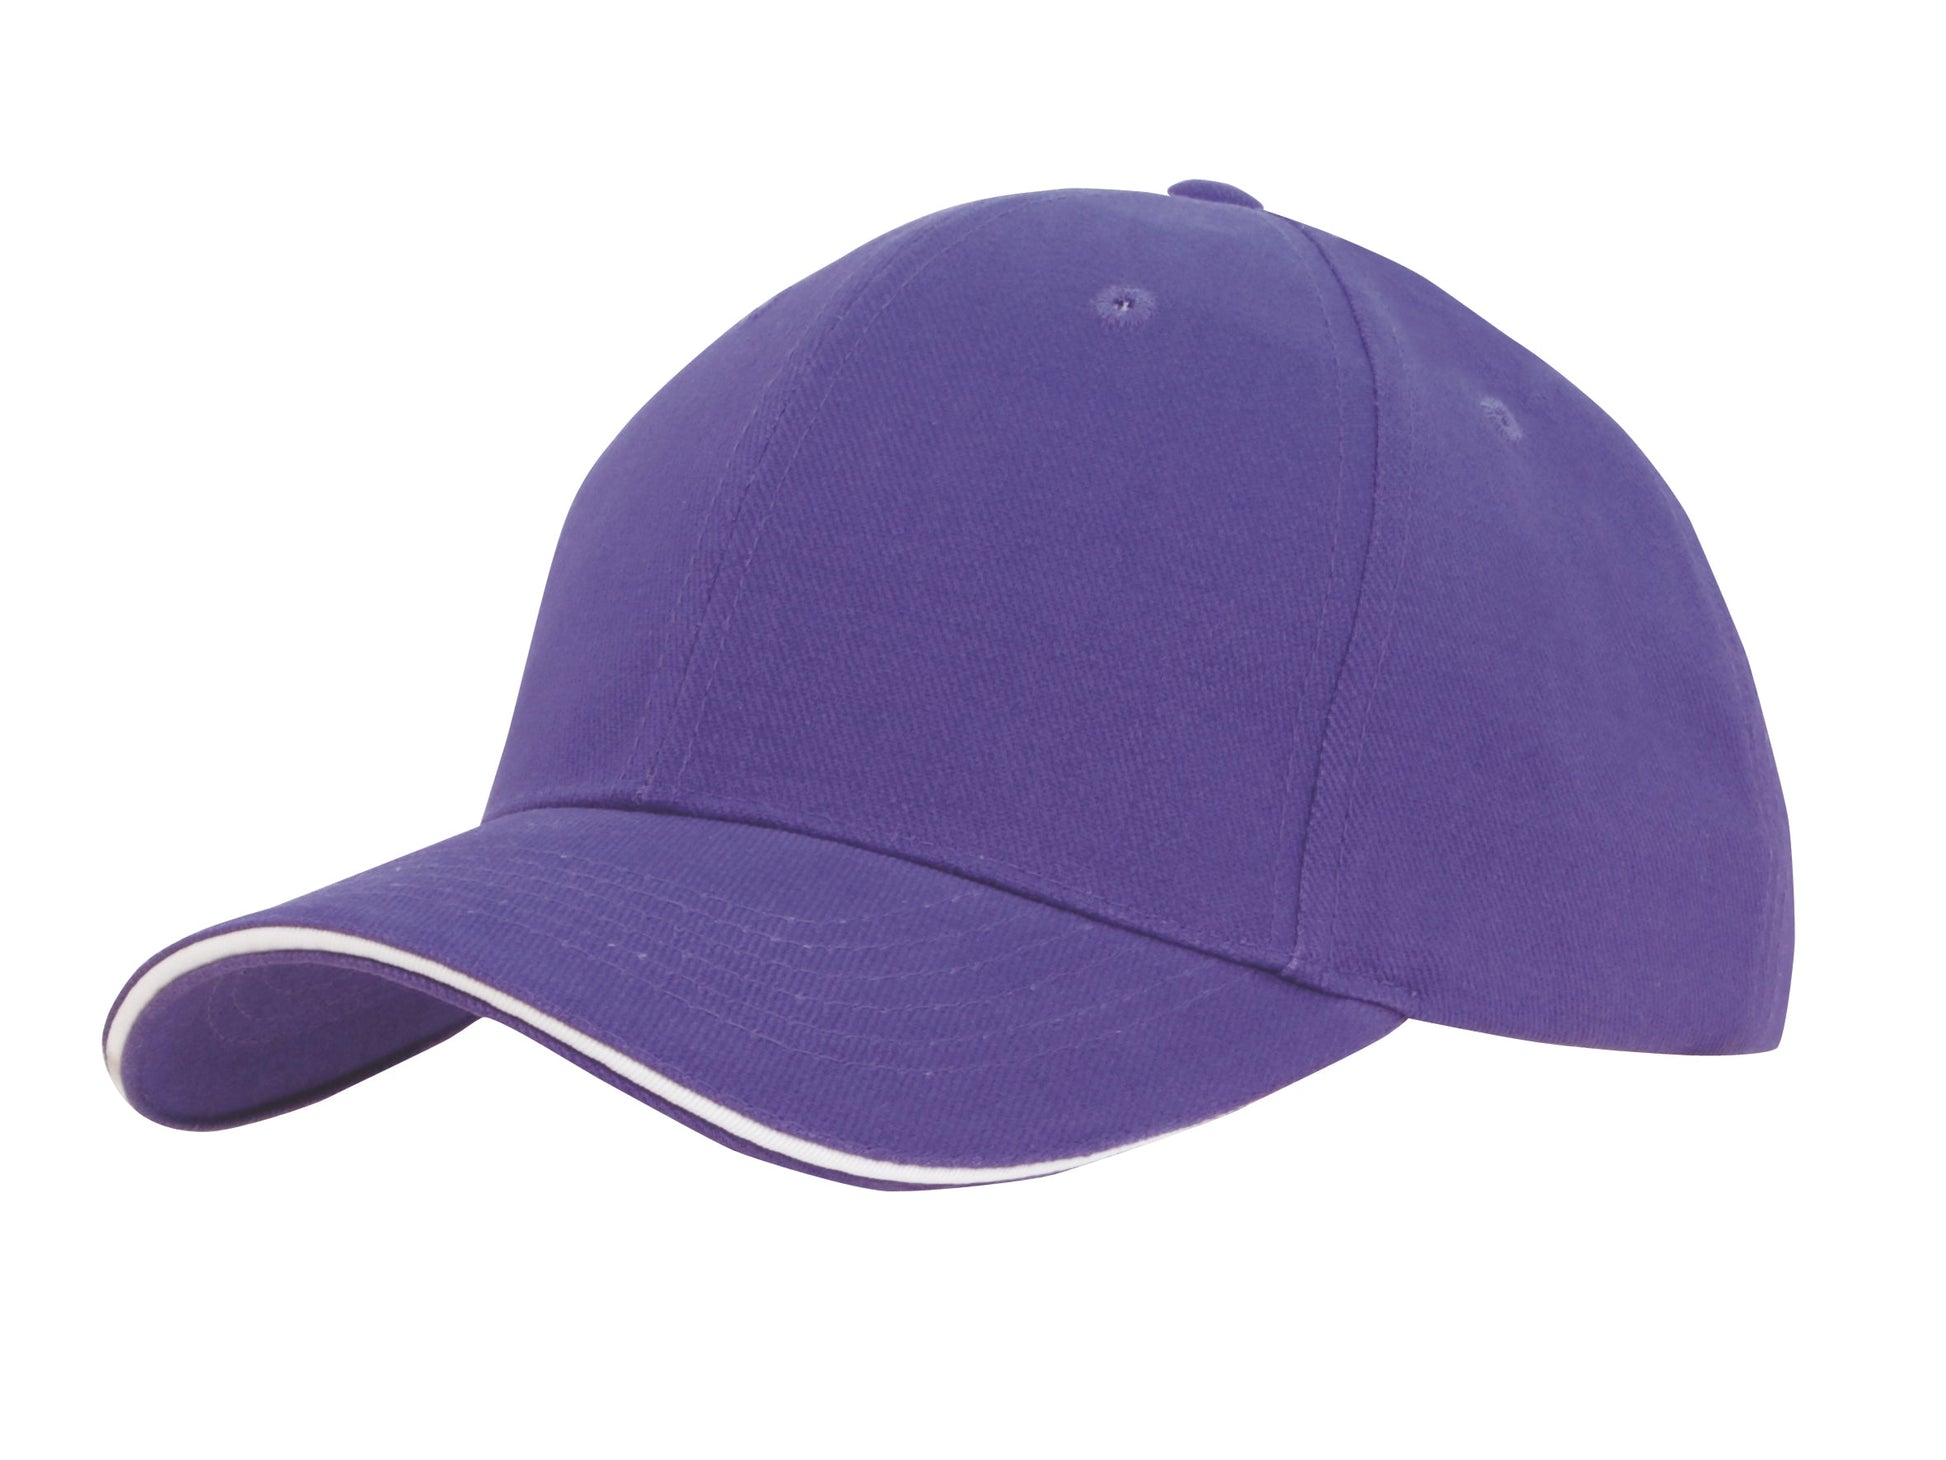 Headwear Brushed Heavy Cotton Cap With Sandwich Trim X12 - 4210 Cap Headwear Professionals Royal/White One Size 